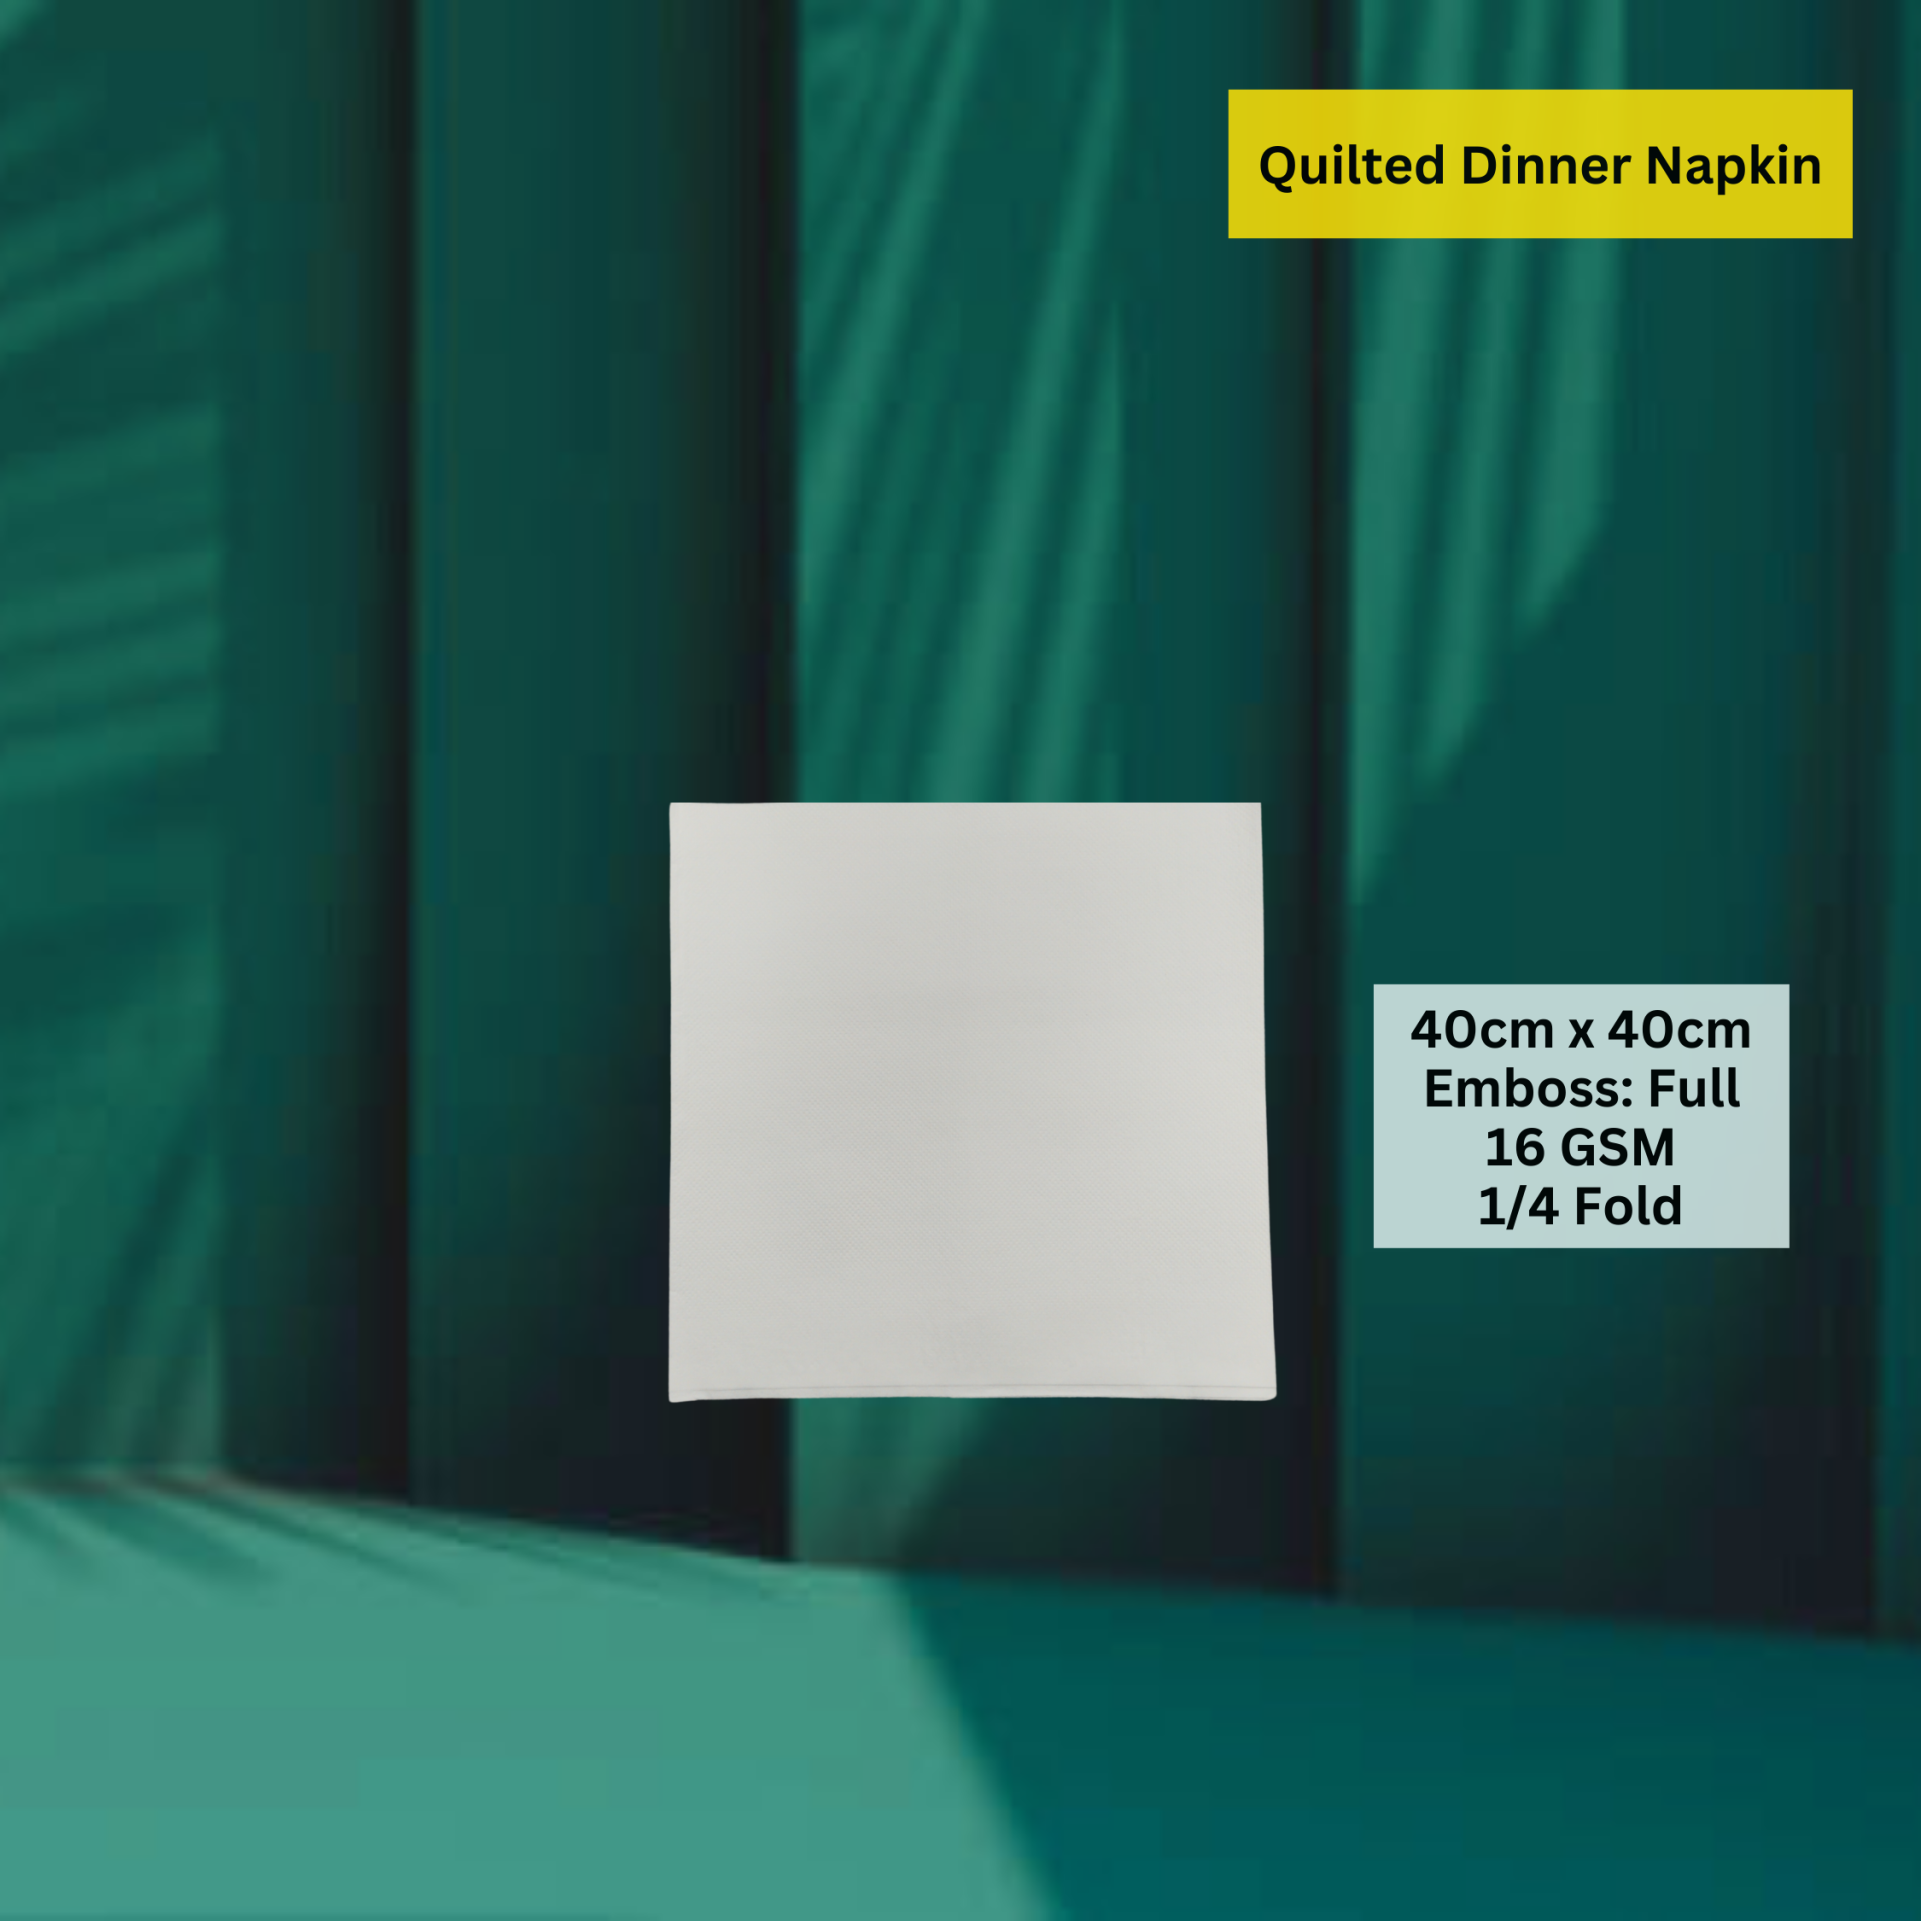 Quilted Dinner Napkin